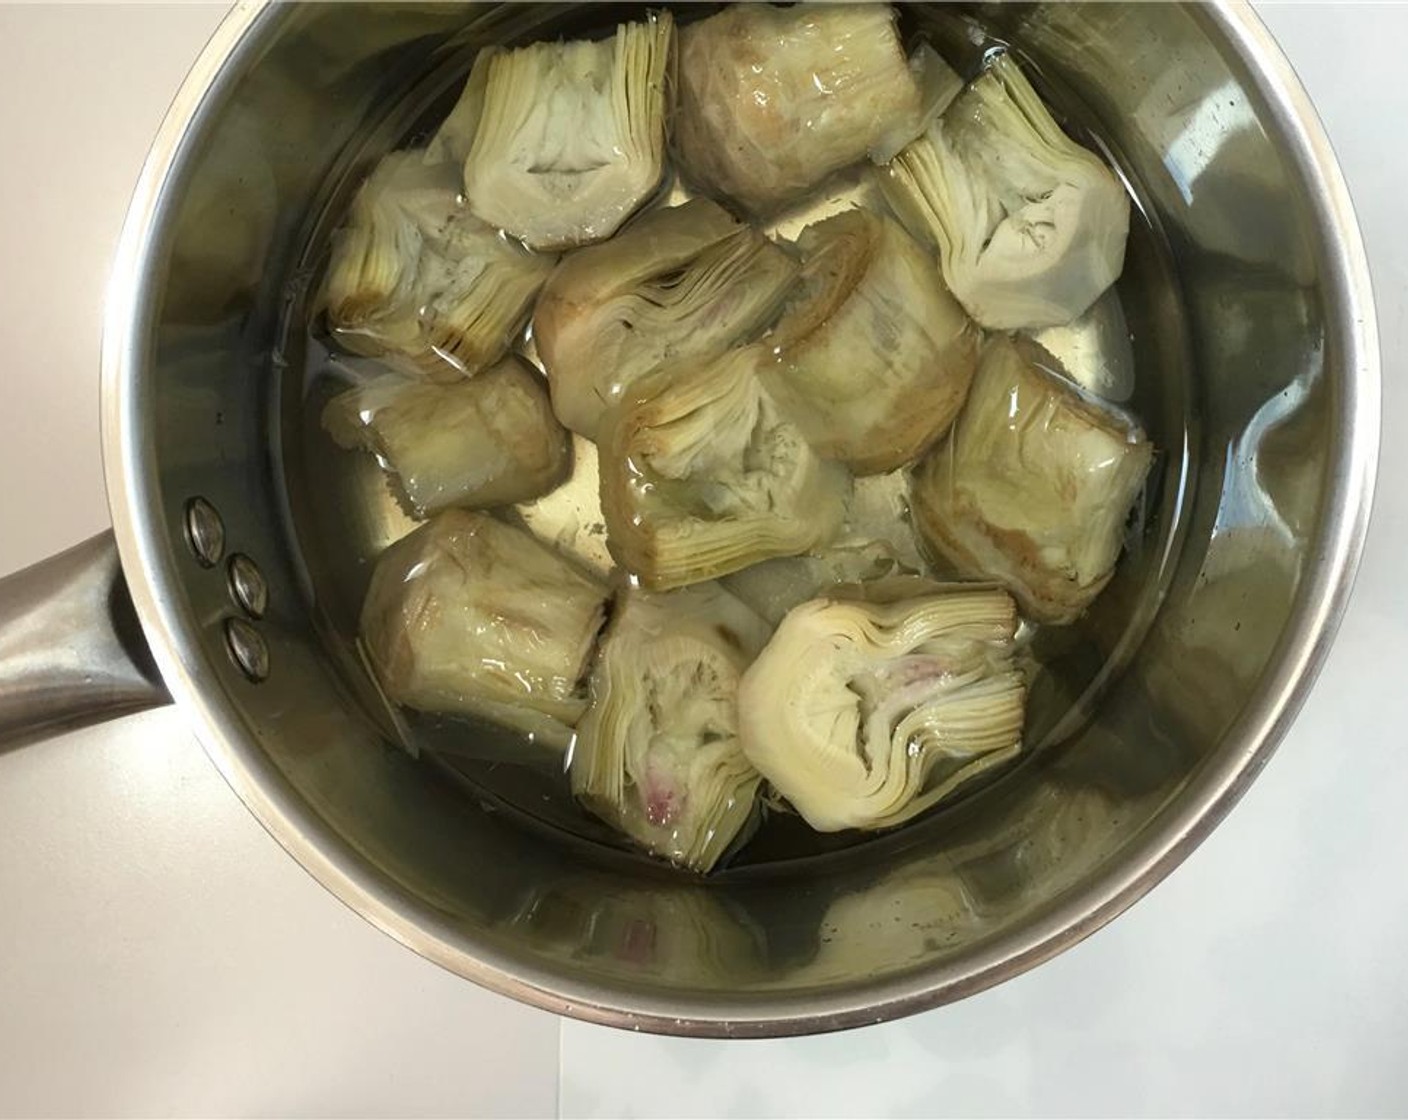 step 2 If you are using fresh Baby Artichokes (6) clean and trim them first. Then add the cleaned fresh artichokes or the frozen artichokes to a large saucepan and add water until the artichokes are fully submerged. Season with a pinch of Salt (to taste).